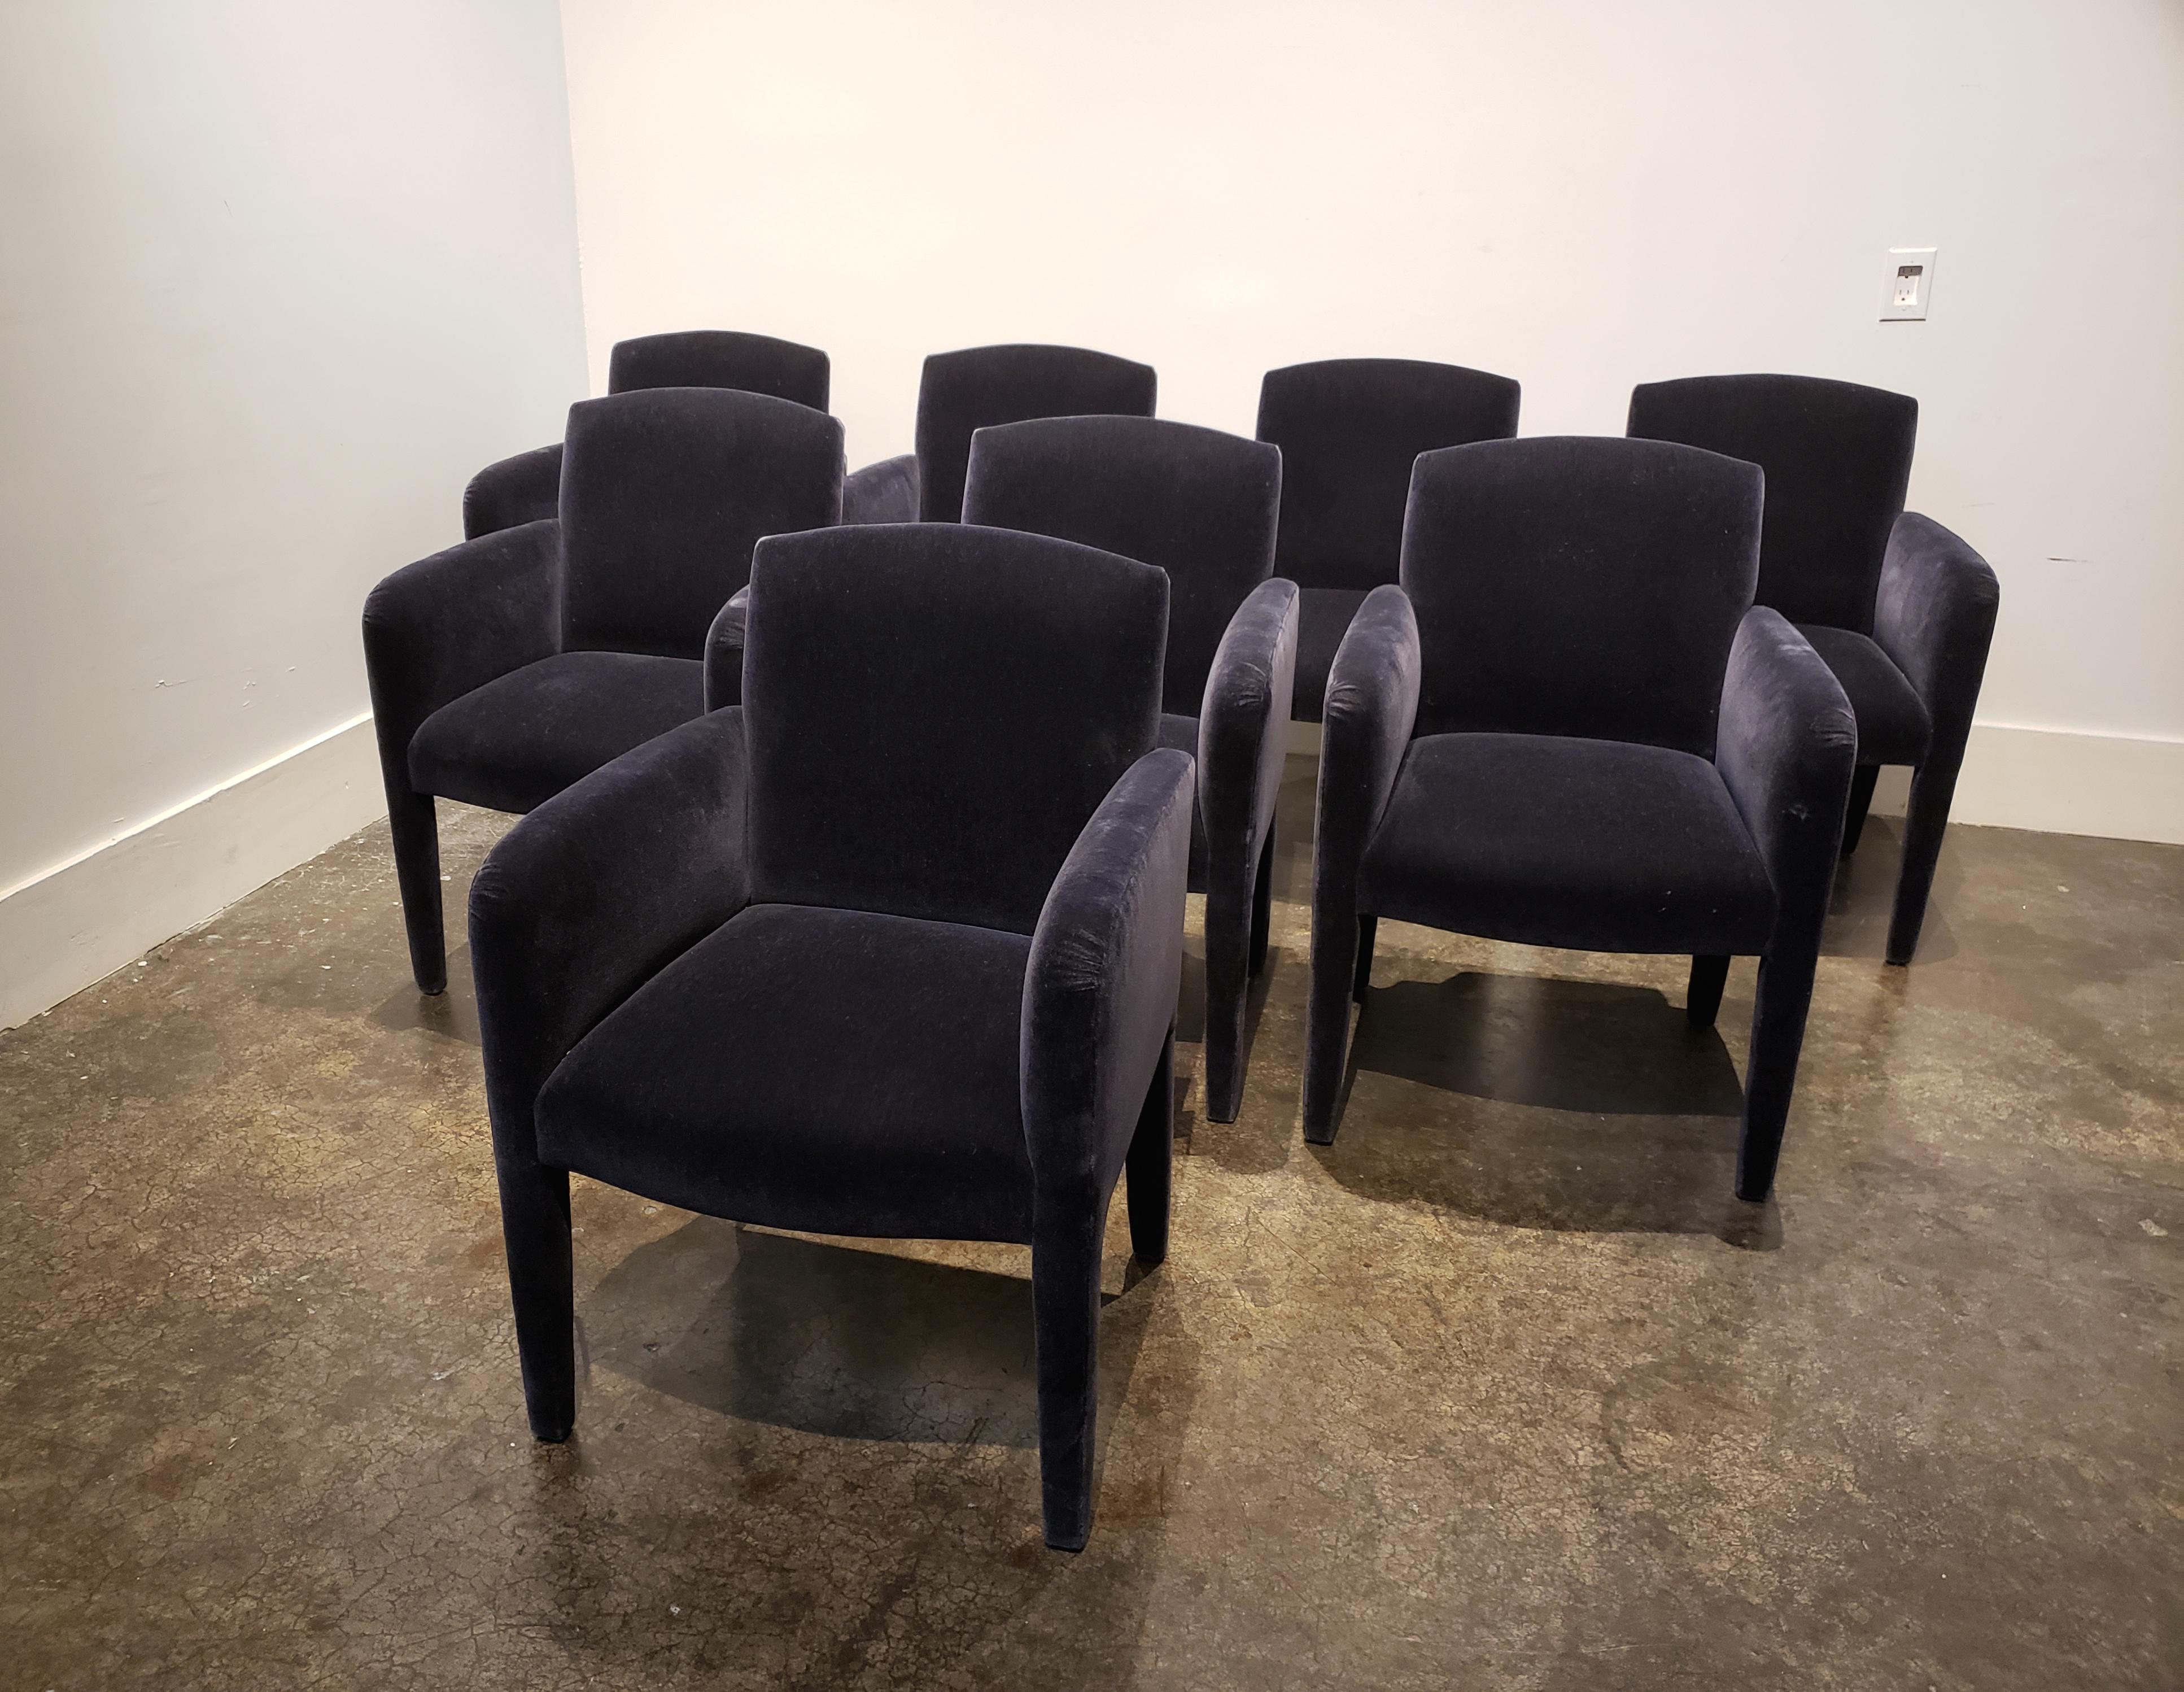 Modern design dining chairs fully upholstered in dark blue mohair manufactured by Donghia. In good condition with light wear to upholstery. Set of 8.

Each chair measures 24